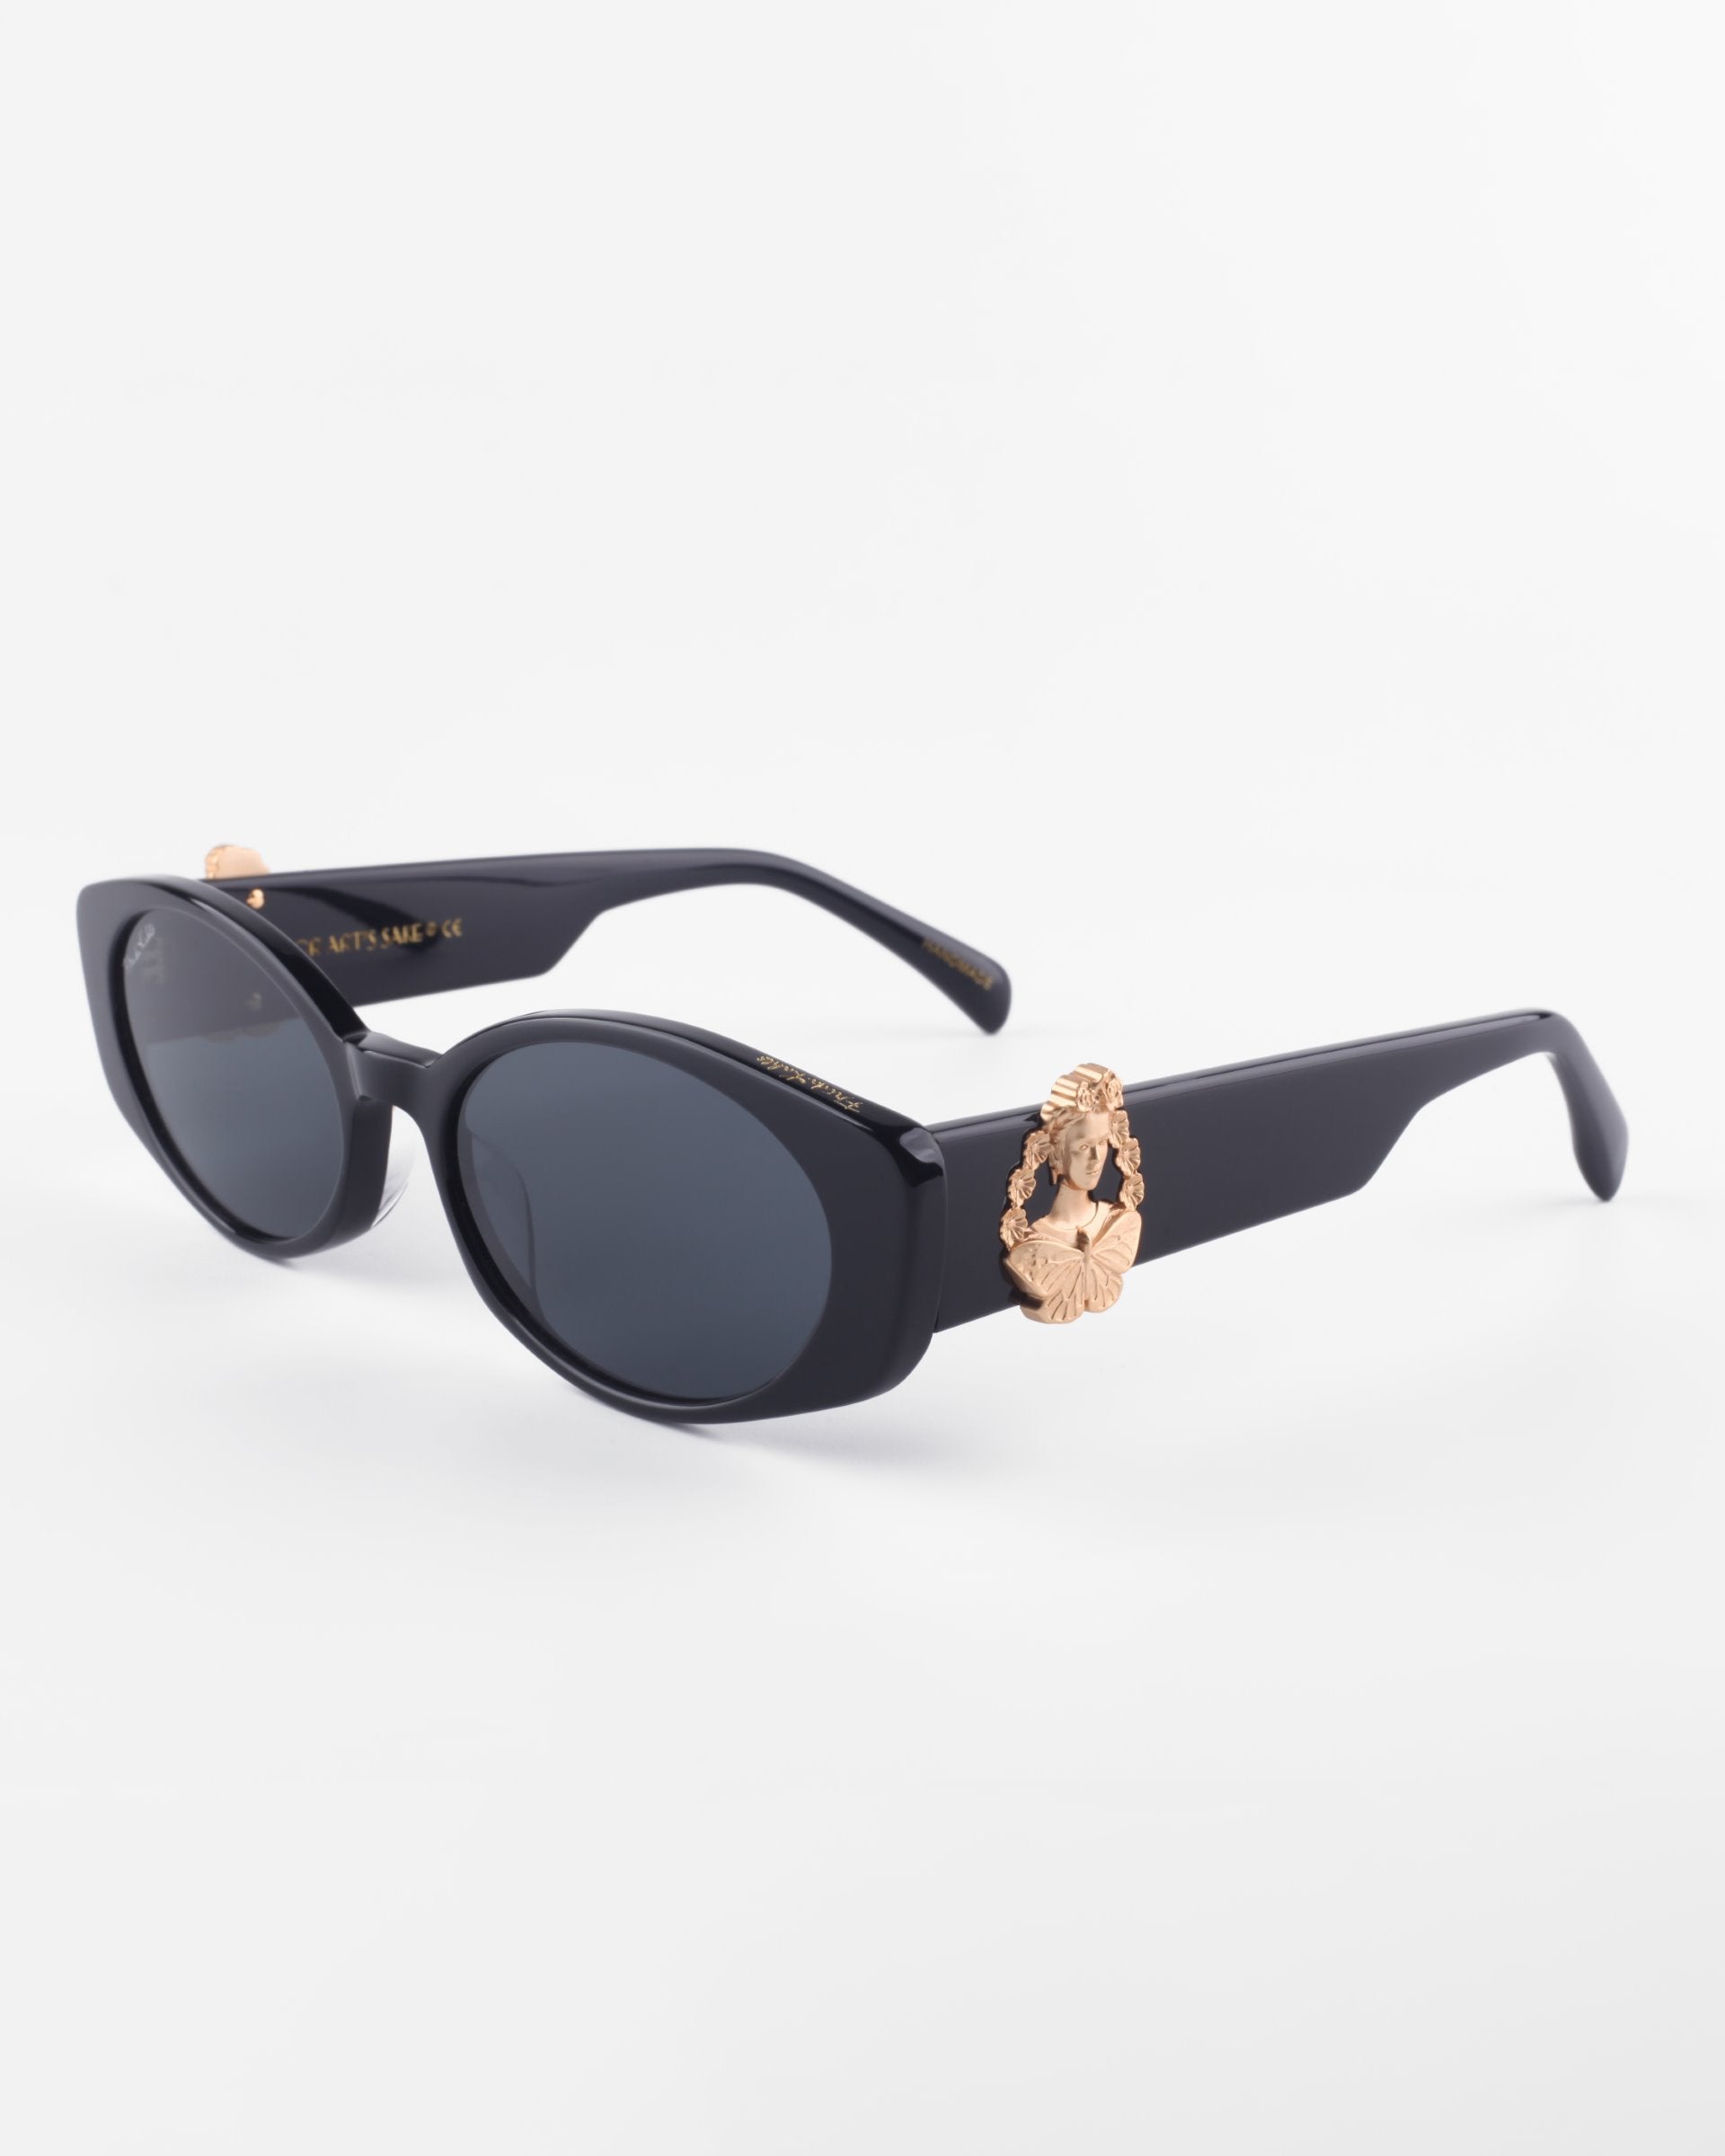 A pair of black, oval-shaped Frida Portrait sunglasses with dark lenses by For Art&#39;s Sake®. The sunglasses feature an 18-karat gold-plated decorative element on the temples, resembling a stylized, ornate design. The ultra-lightweight Nylon lenses offer 100% UVA &amp; UVB protection. The arms are wide and the frame is glossy. The background is plain white.